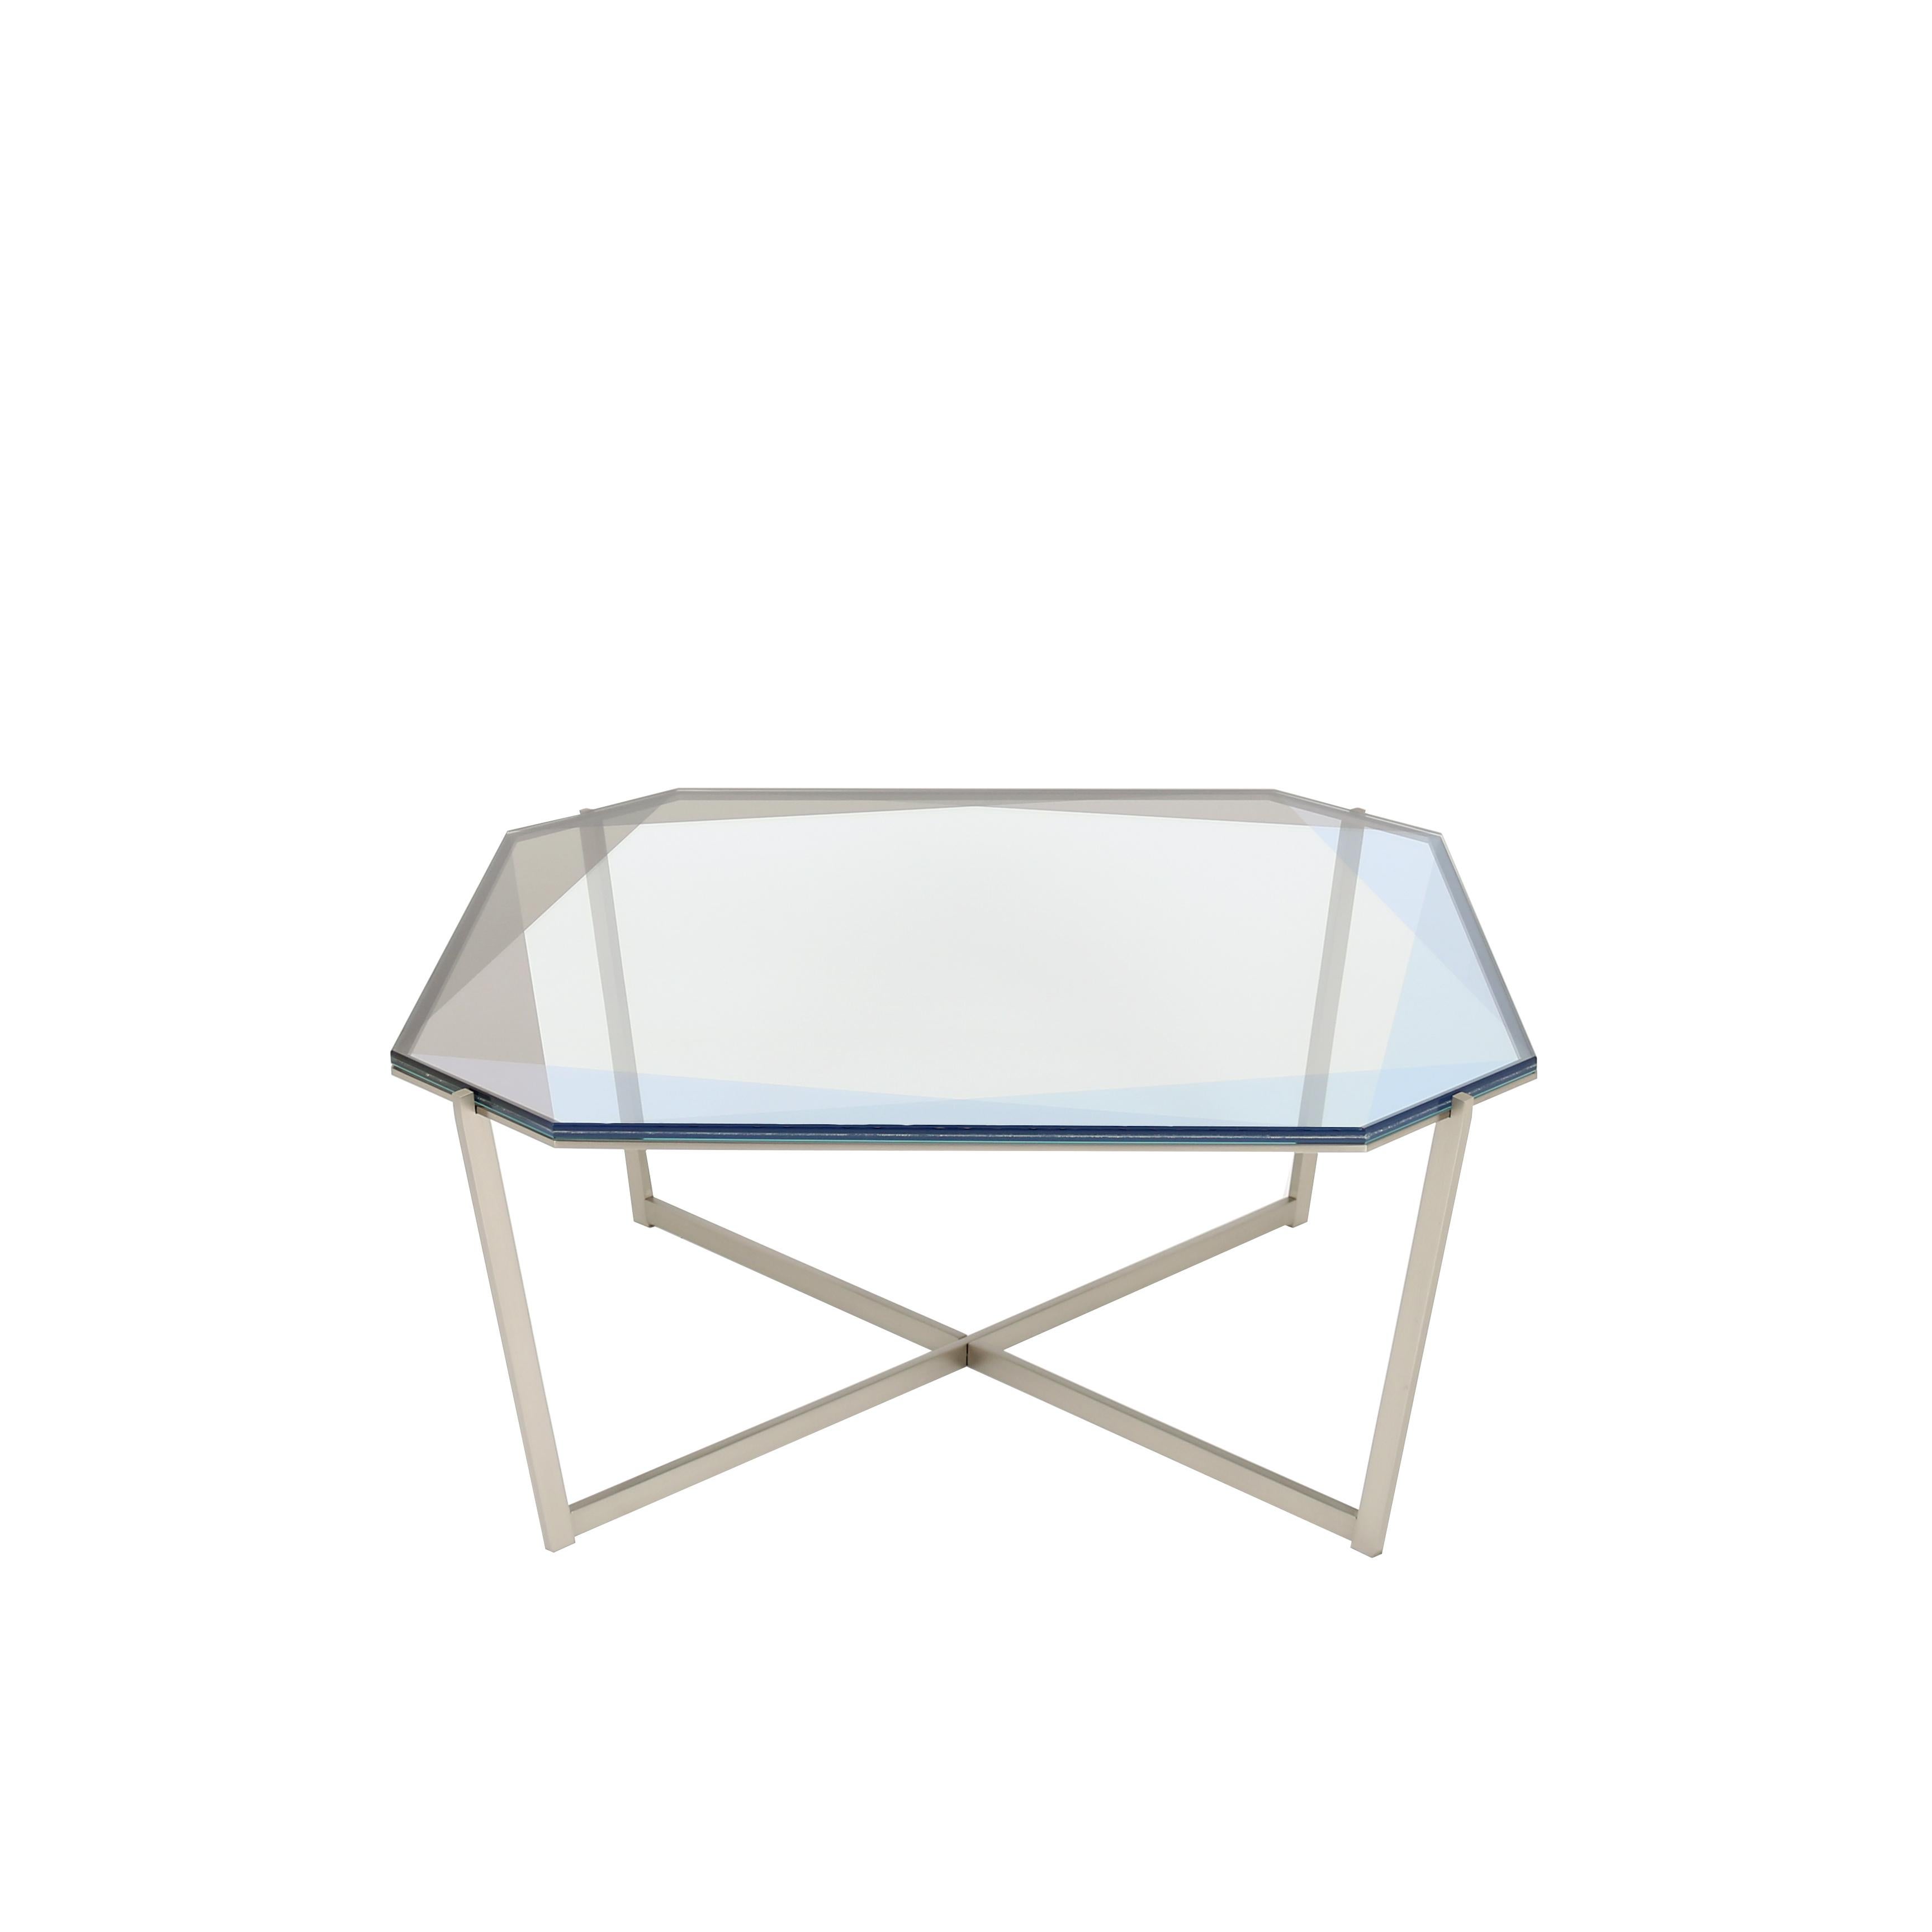 Gem Square Coffee Table - Blue Glass w/ Stainless Steel Base by Debra Folz